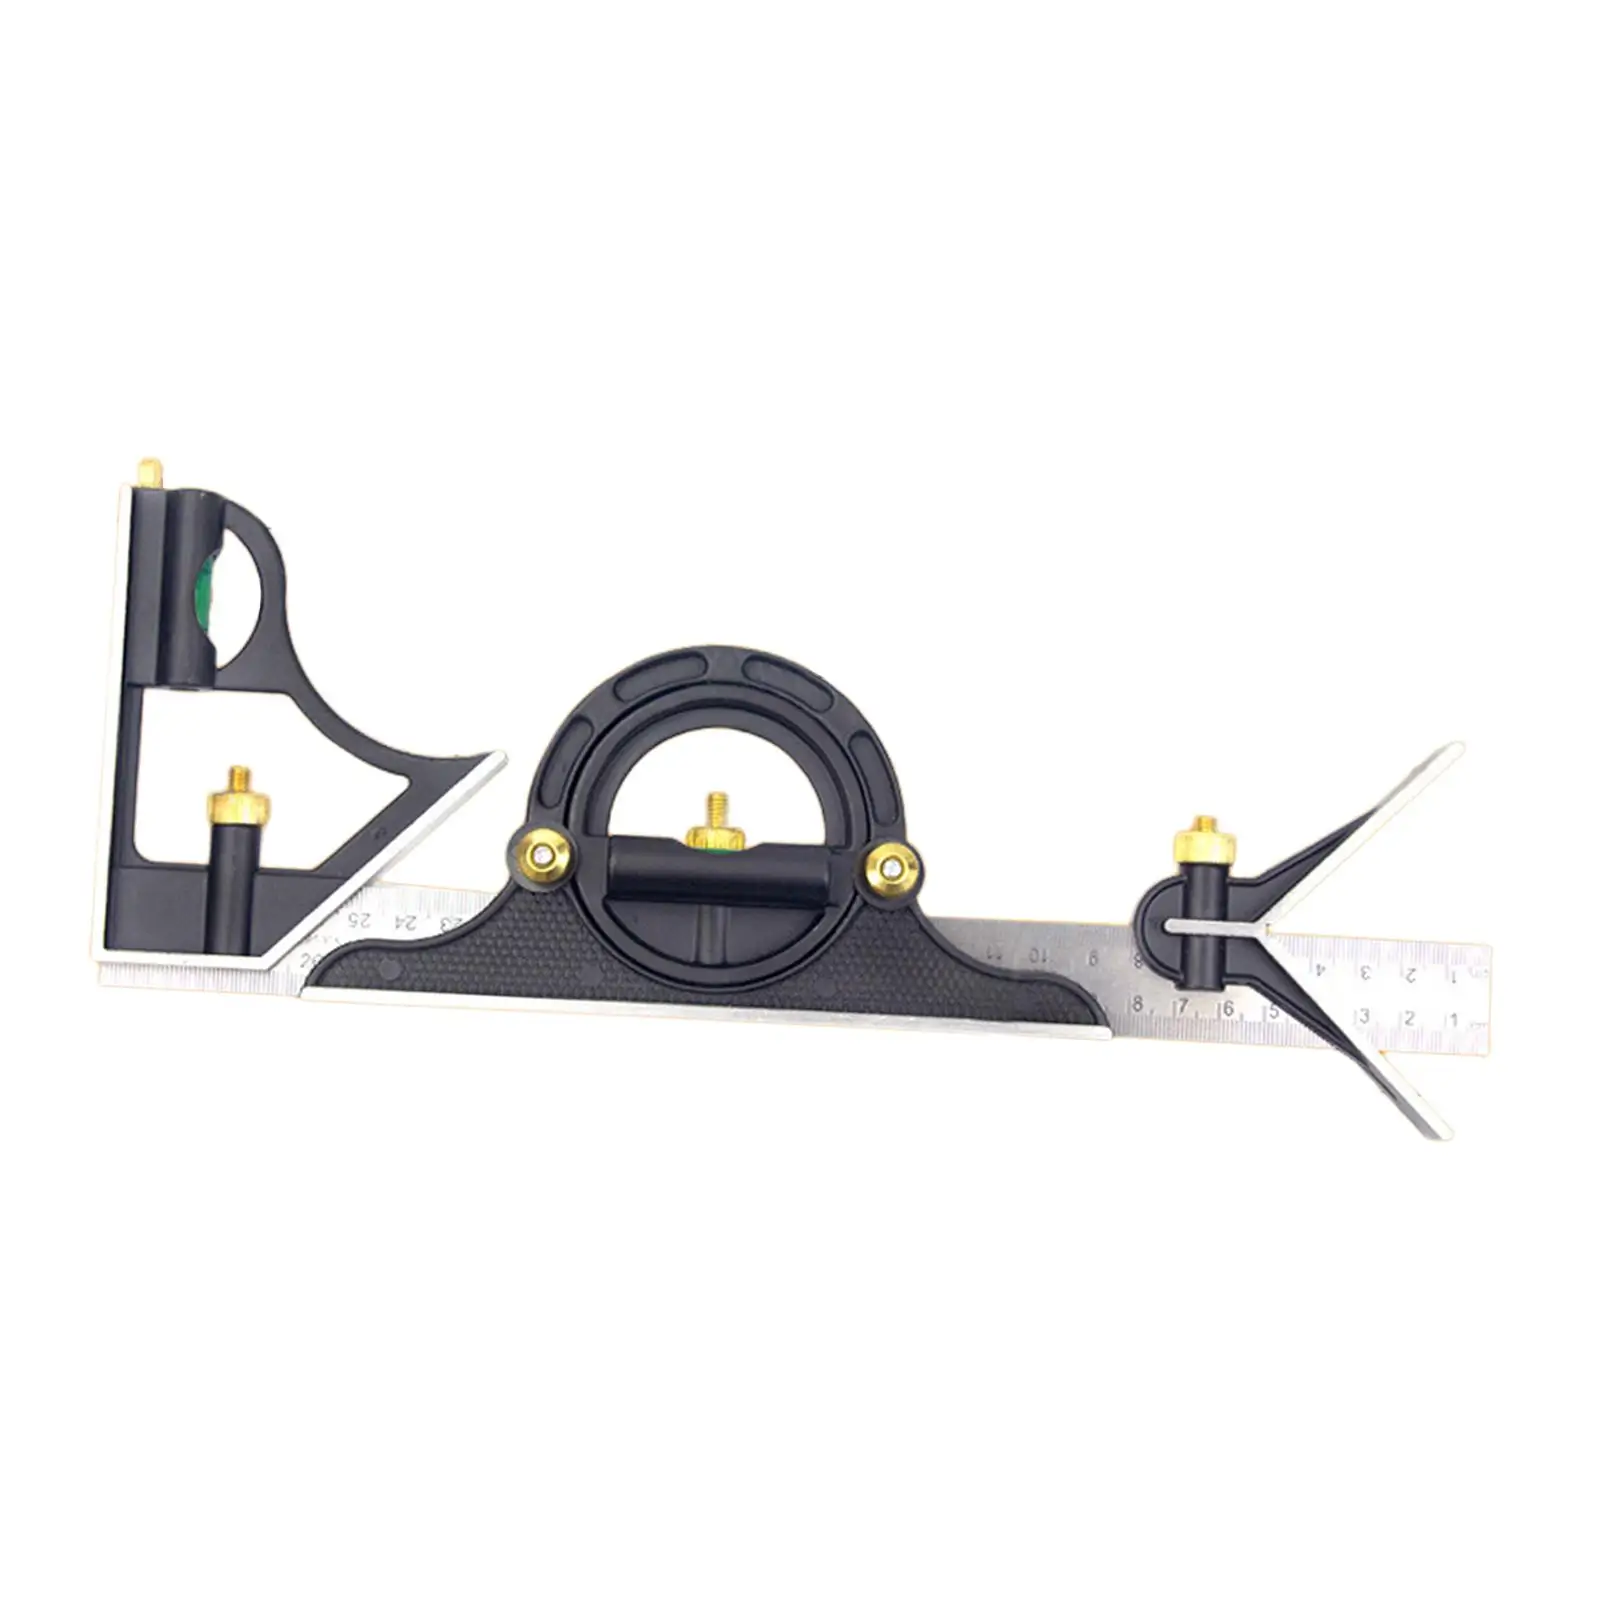 Adjustable Combination Angle Marking Tool Parallel Ruler Professional Multifunctional 45 / 90 Degree Right Protractor Square